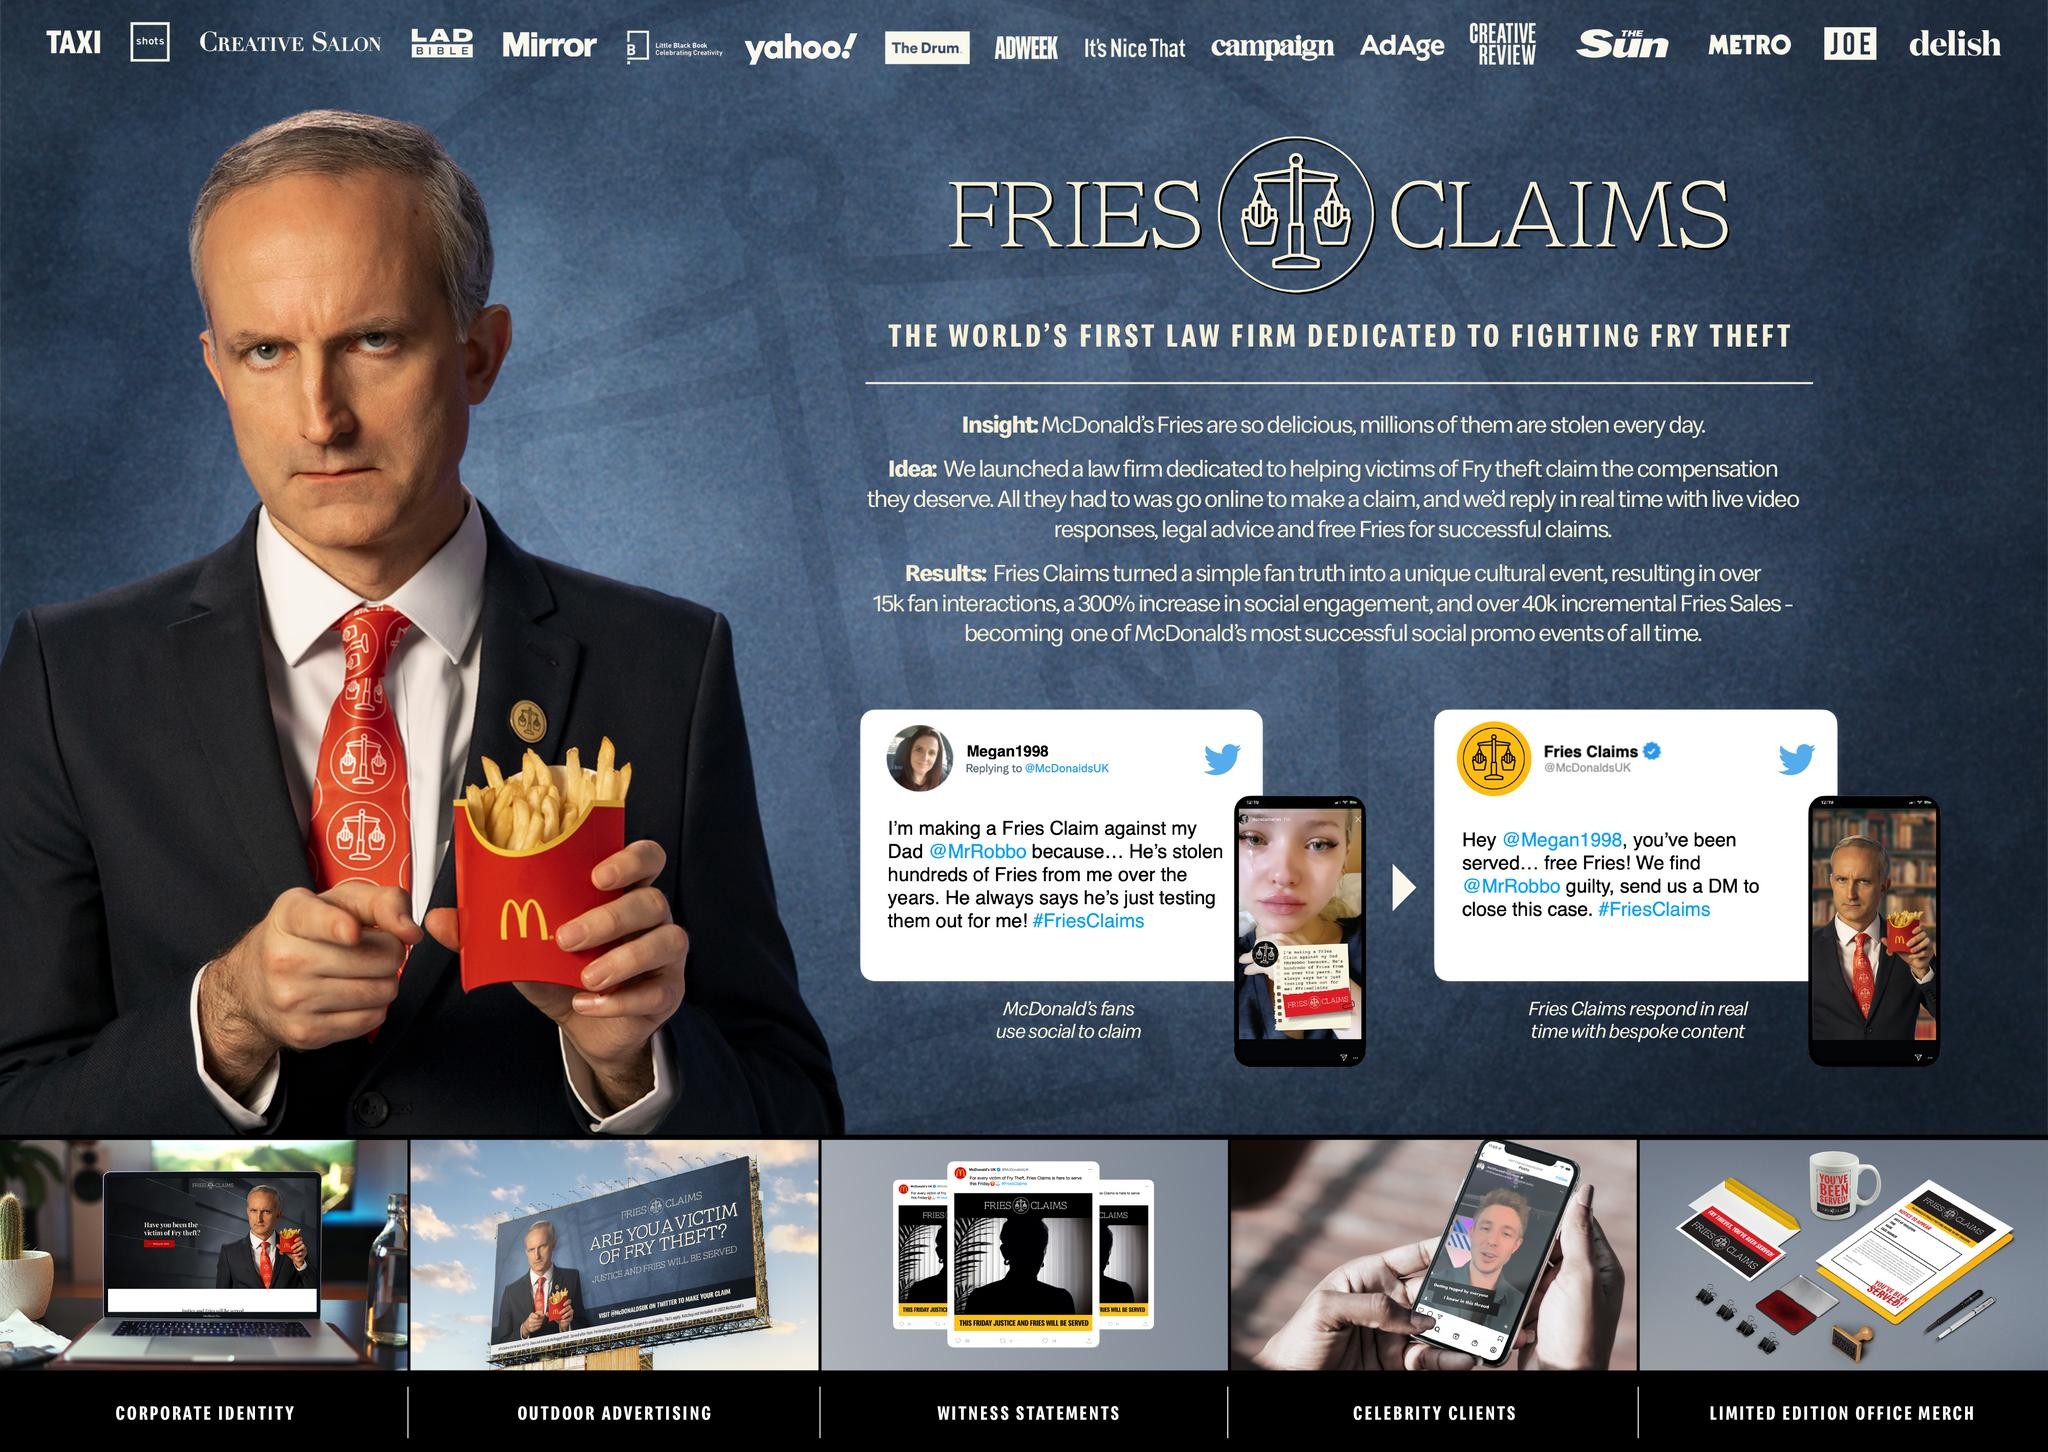 Fries Claims